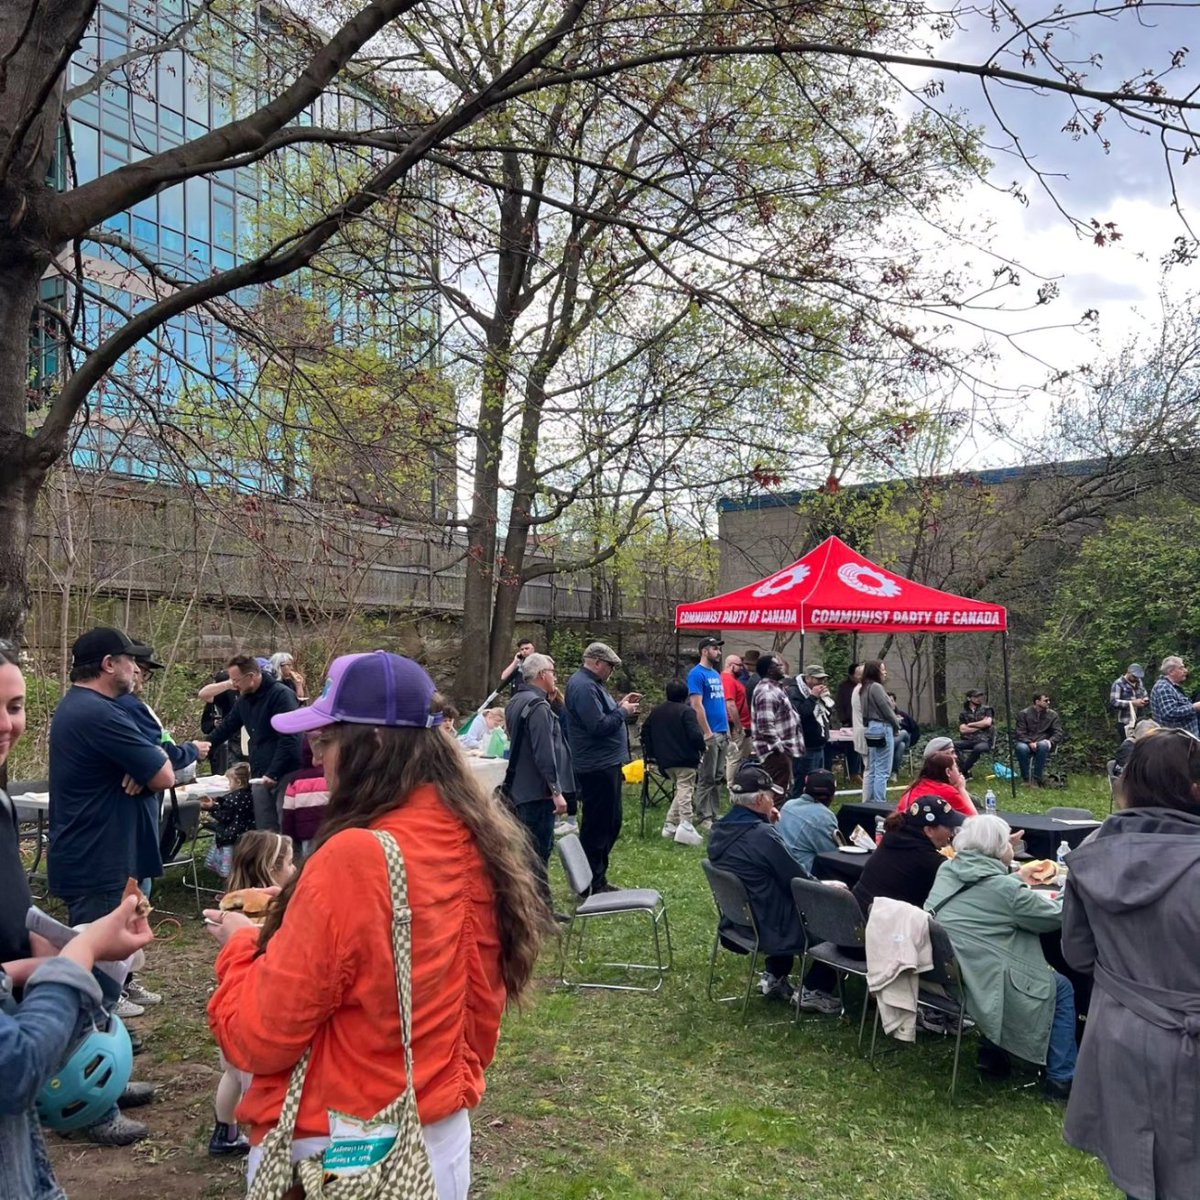 Happy May Day everyone! Had an awesome time in Hamilton at the Worker's Art and Heritage Centre @WAHC with the Hamilton District Labour Council @hamiltonlabour catching up with so many comrades. #HamOnt #MayDay